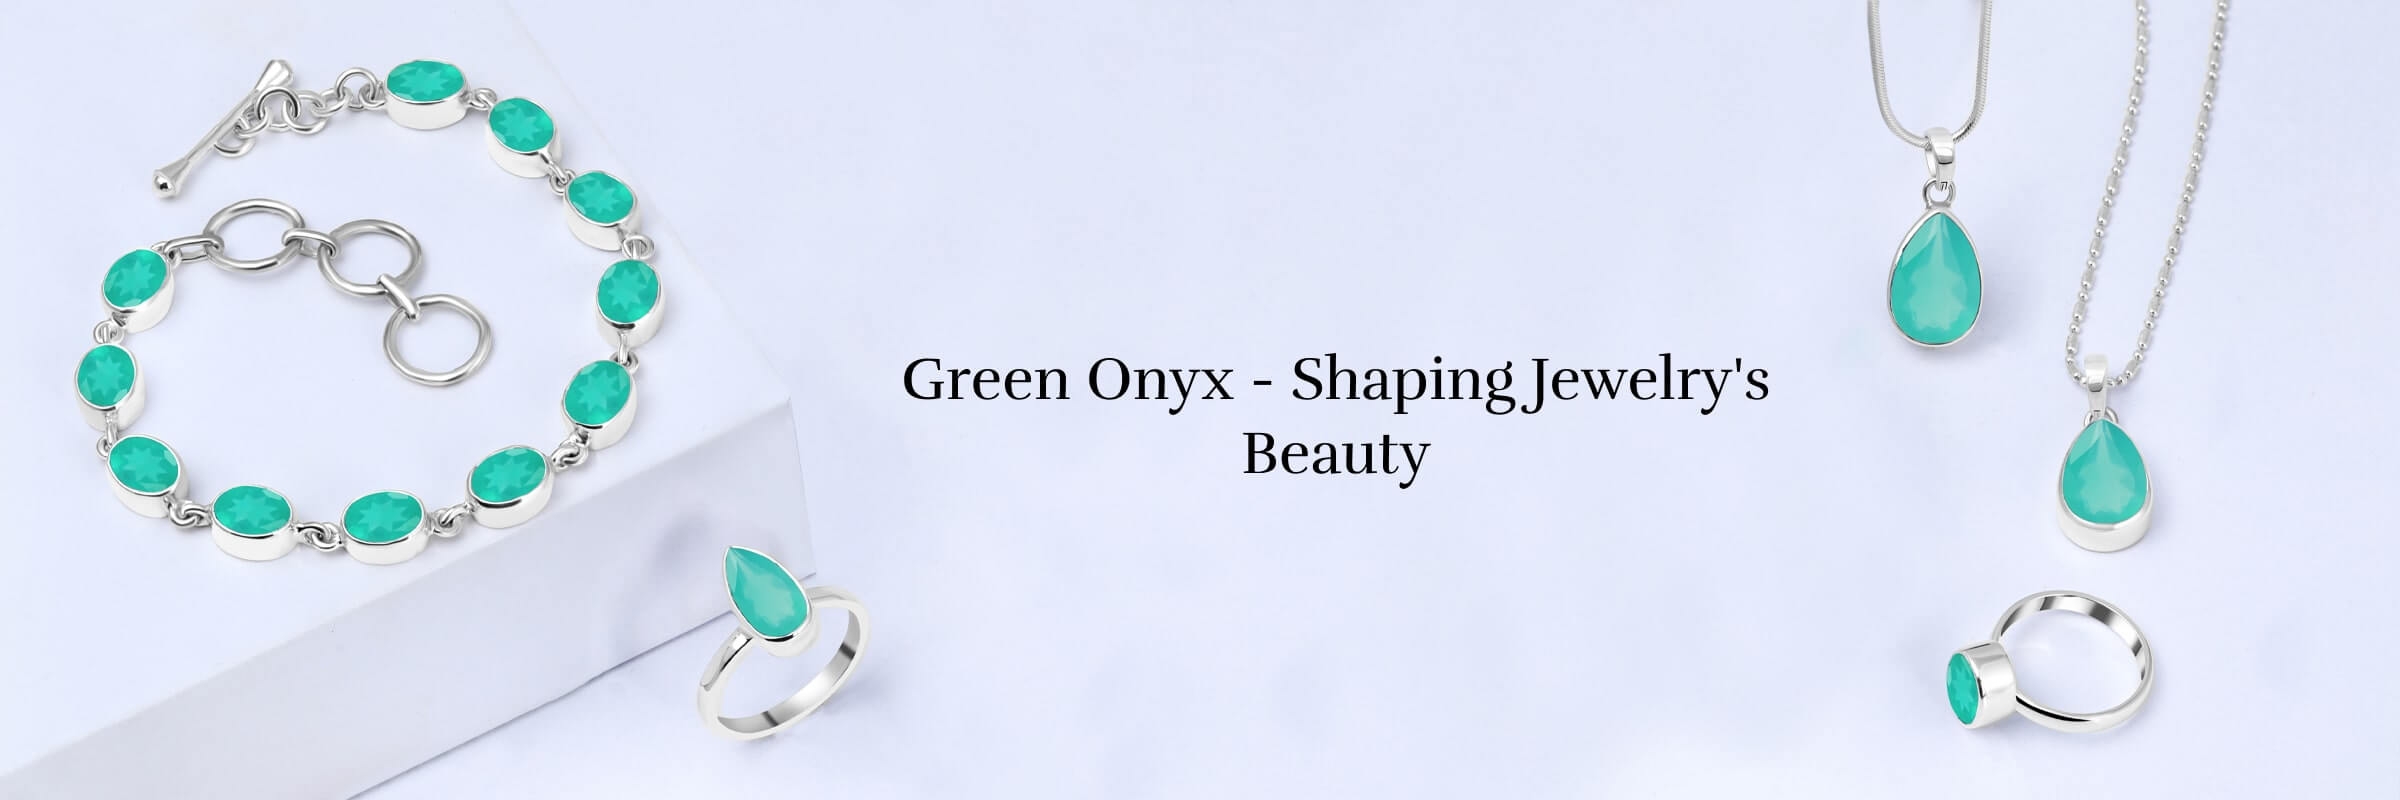 Uses and Importance of Green Onyx in Jewelry Making